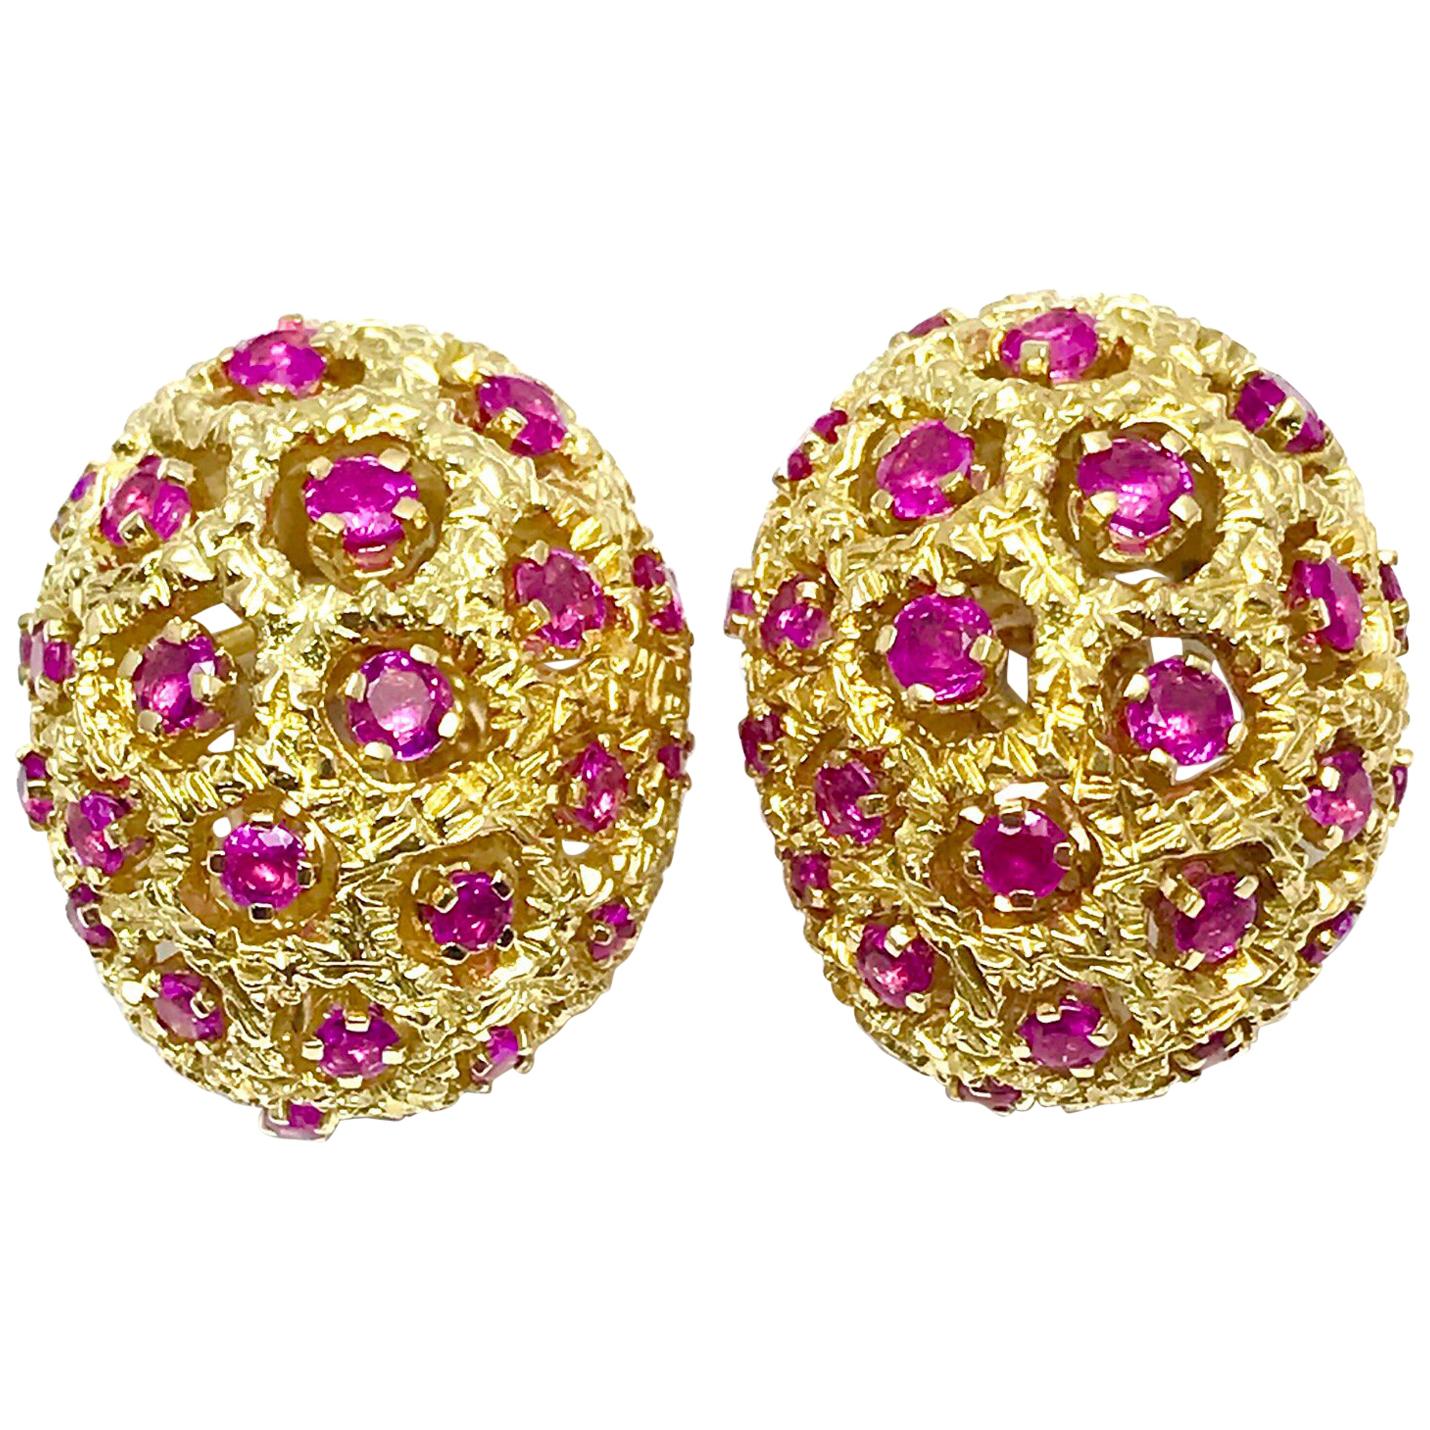 Tiffany & Co. Round Ruby and 18 Karat Yellow Gold Domed Clip Earrings